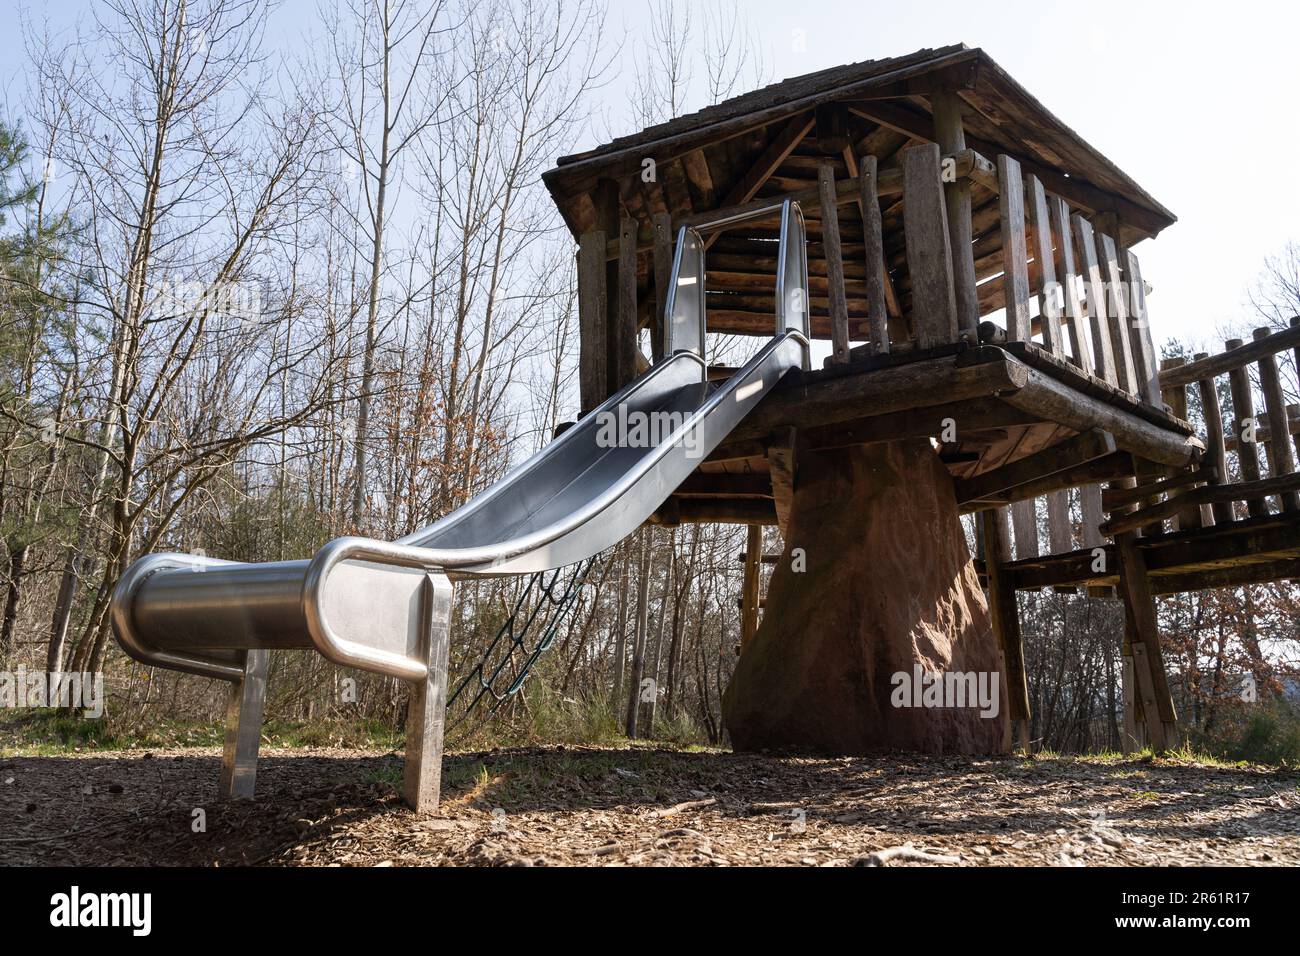 Wooden play house with a slide for children in the playground Stock Photo